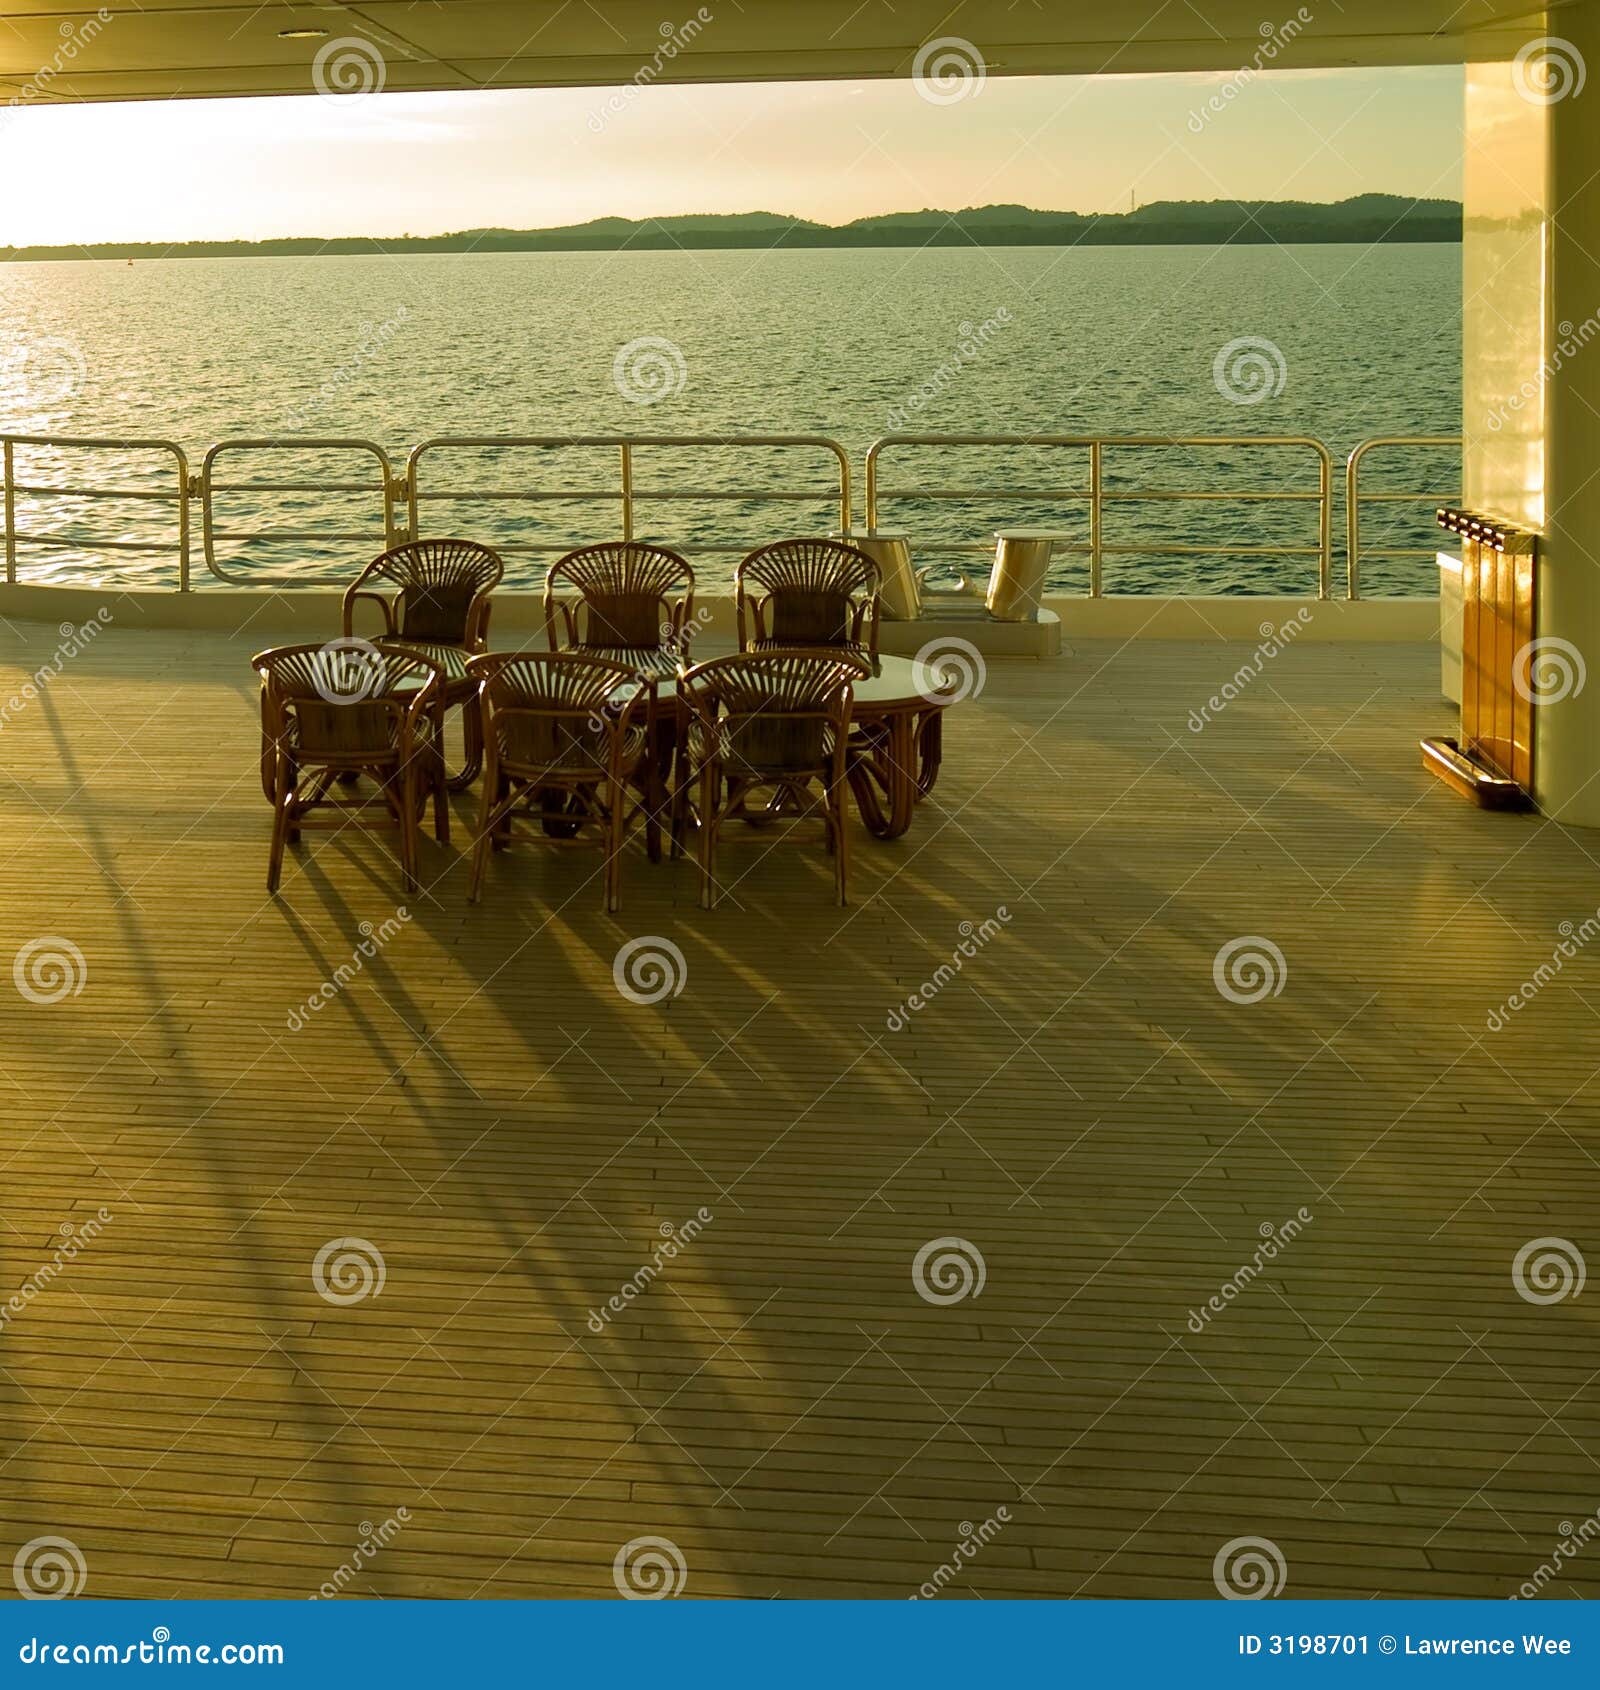 rattan chairs on ship deck